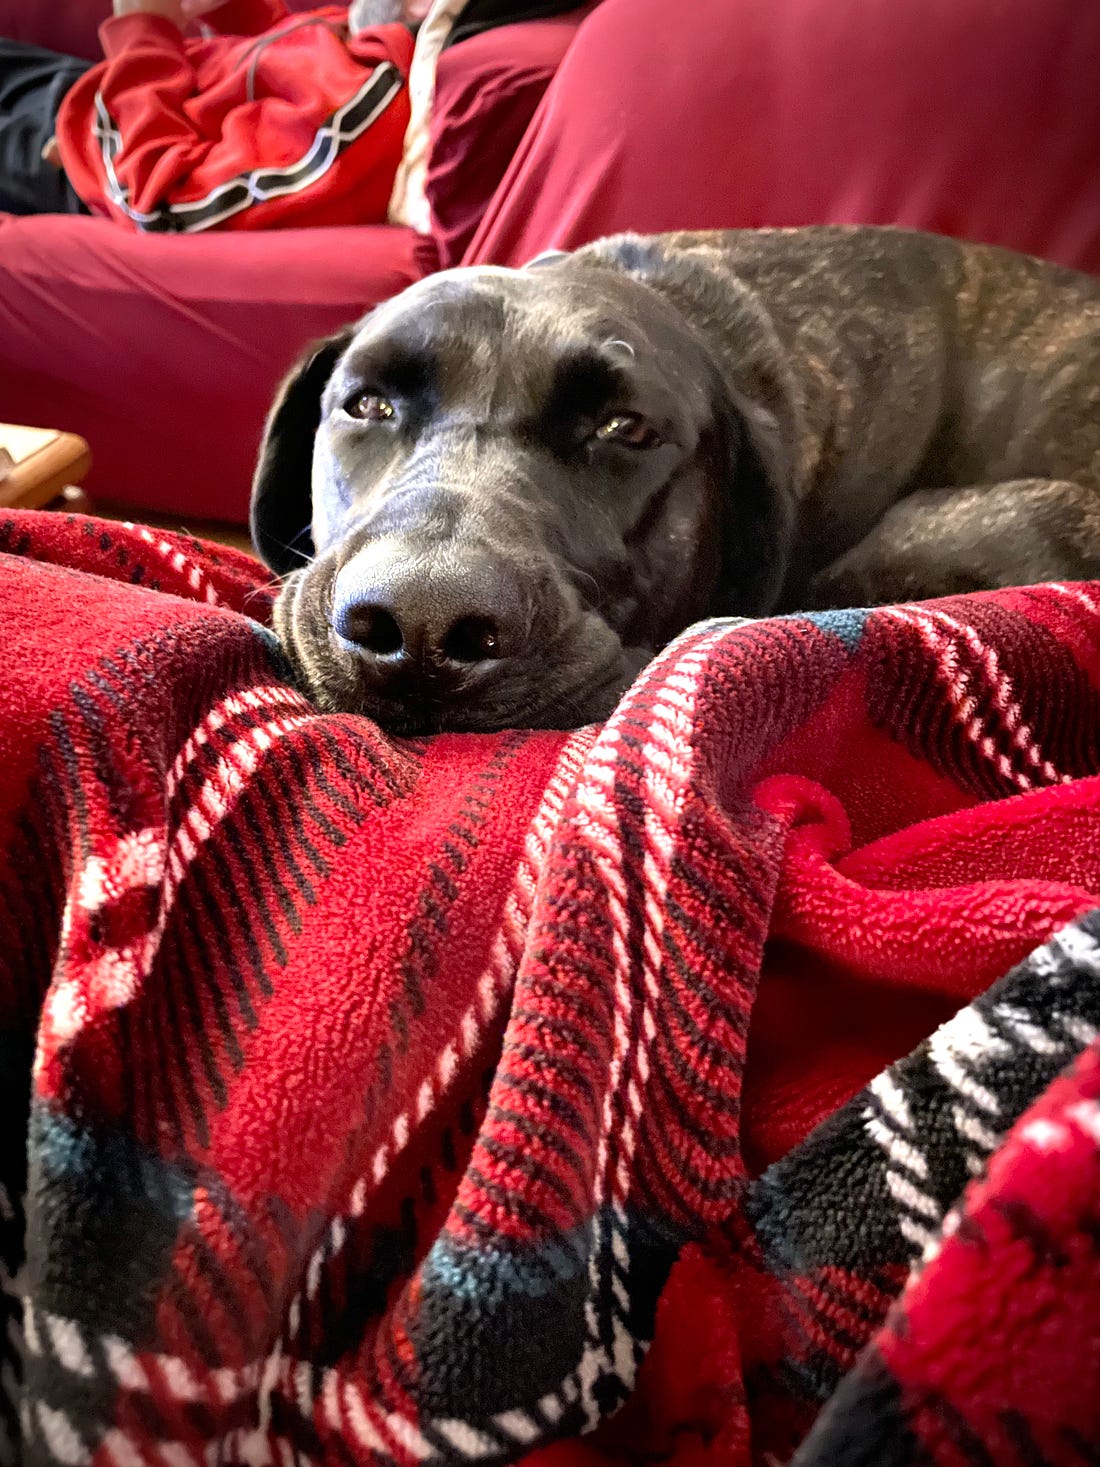 A sleepy black dog rests her head on a plush red blanket and looks blearily at the camera. In the background, a person lays on the couch. 